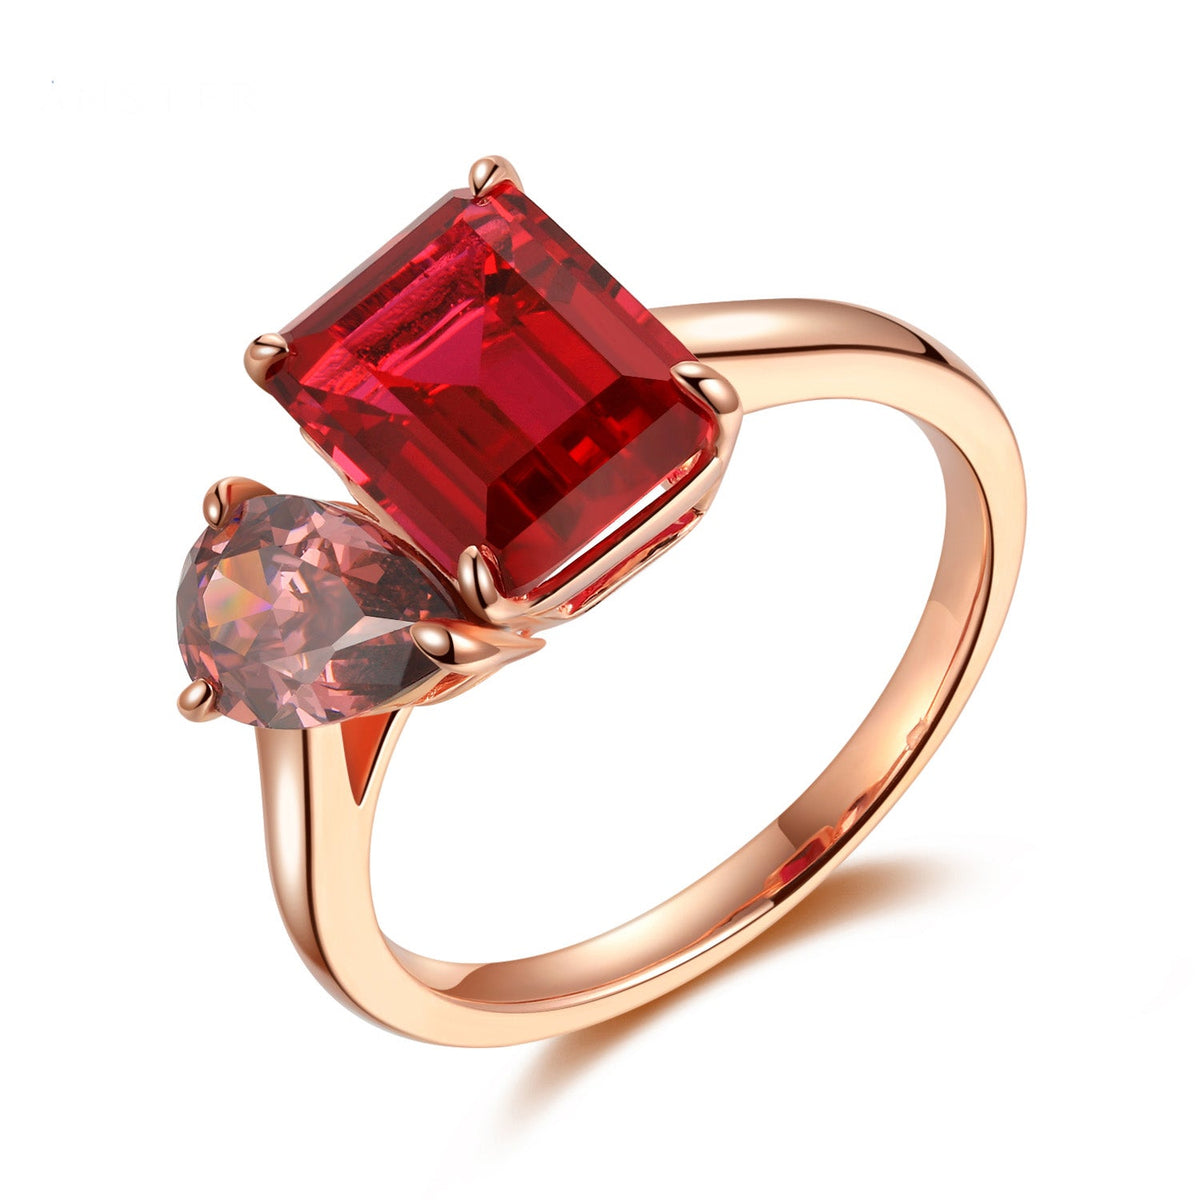 Etoilier 925 Sterling Silver Gold Plated Emerald Cut Synthetic Ruby Ring